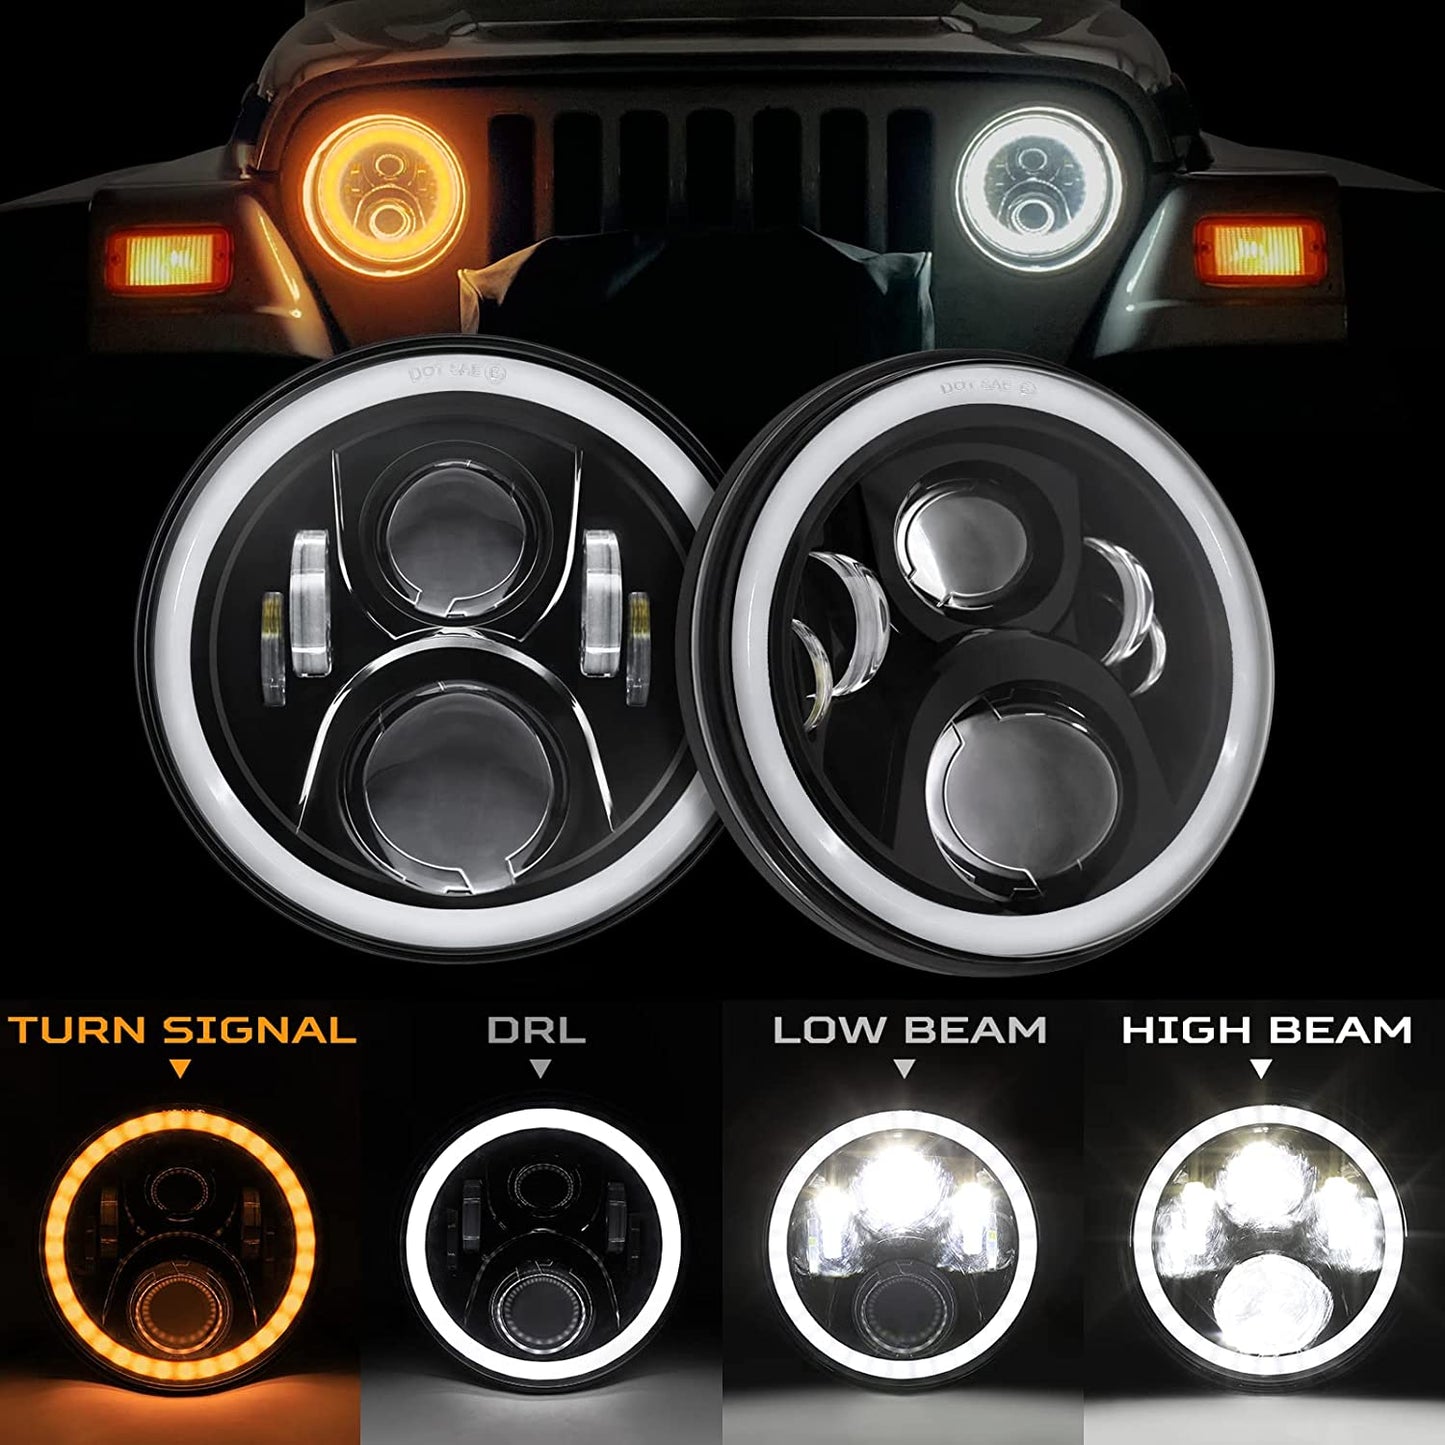 Haitzu 7 inch Led Round Black Hi/lo Sealed Beam headlight DOT Approved Compatible with Jeep Wrangler JK Hummer H1 H2 ,Halo with Amber Turn Light & DRL, H6024 Replacement,included H4-H13 Adaptor 2 Pcs